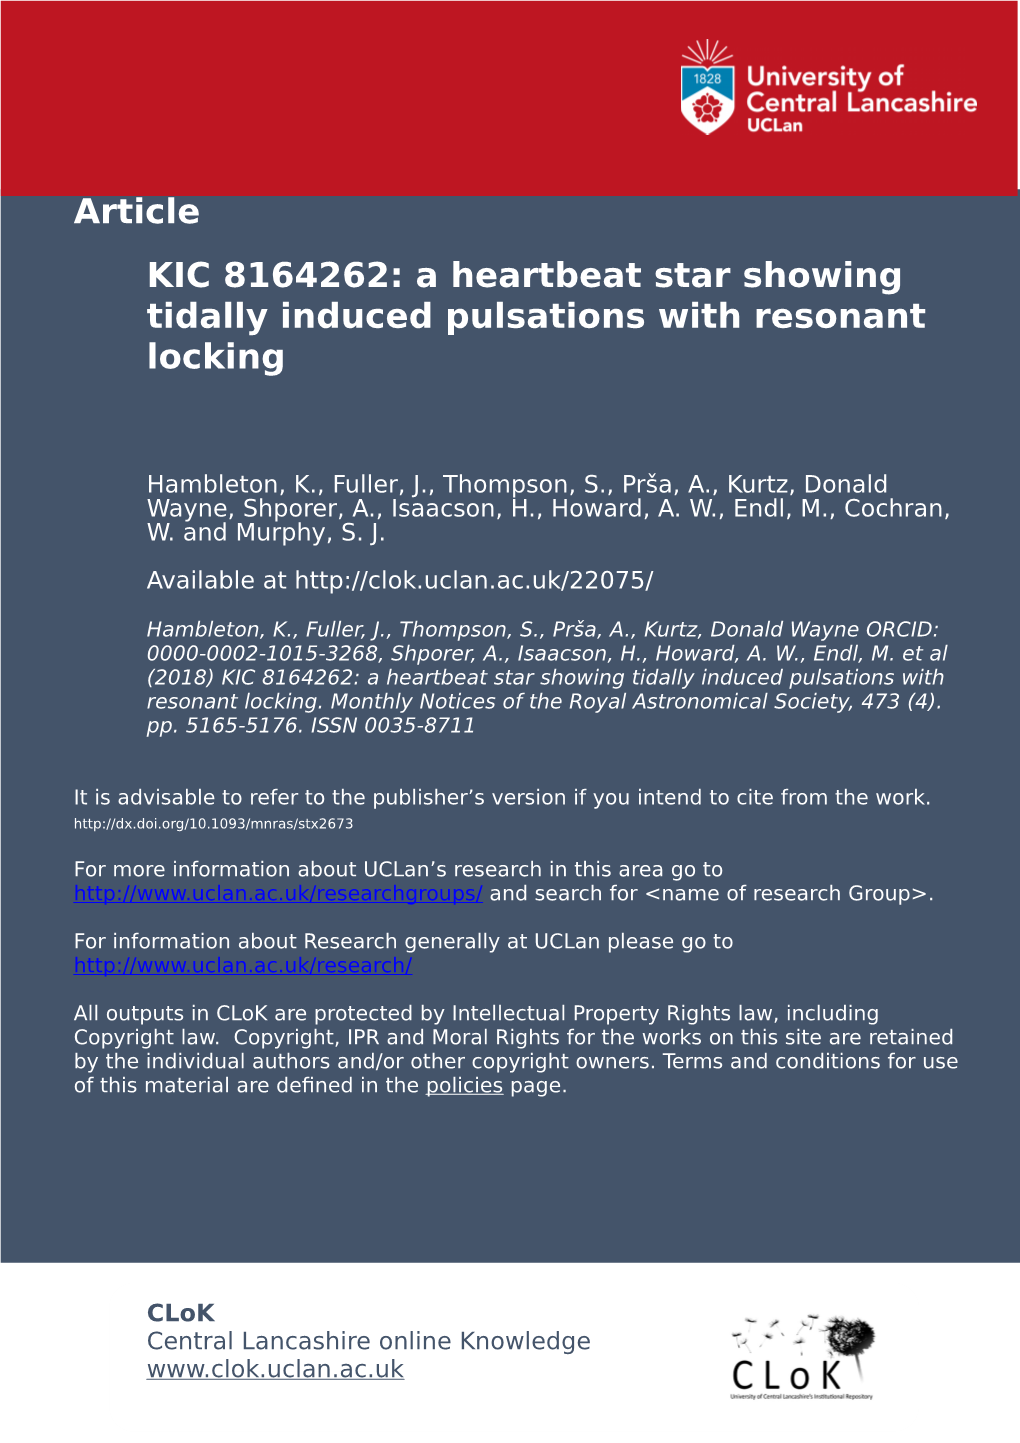 KIC 8164262: a Heartbeat Star Showing Tidally Induced Pulsations with Resonant Locking